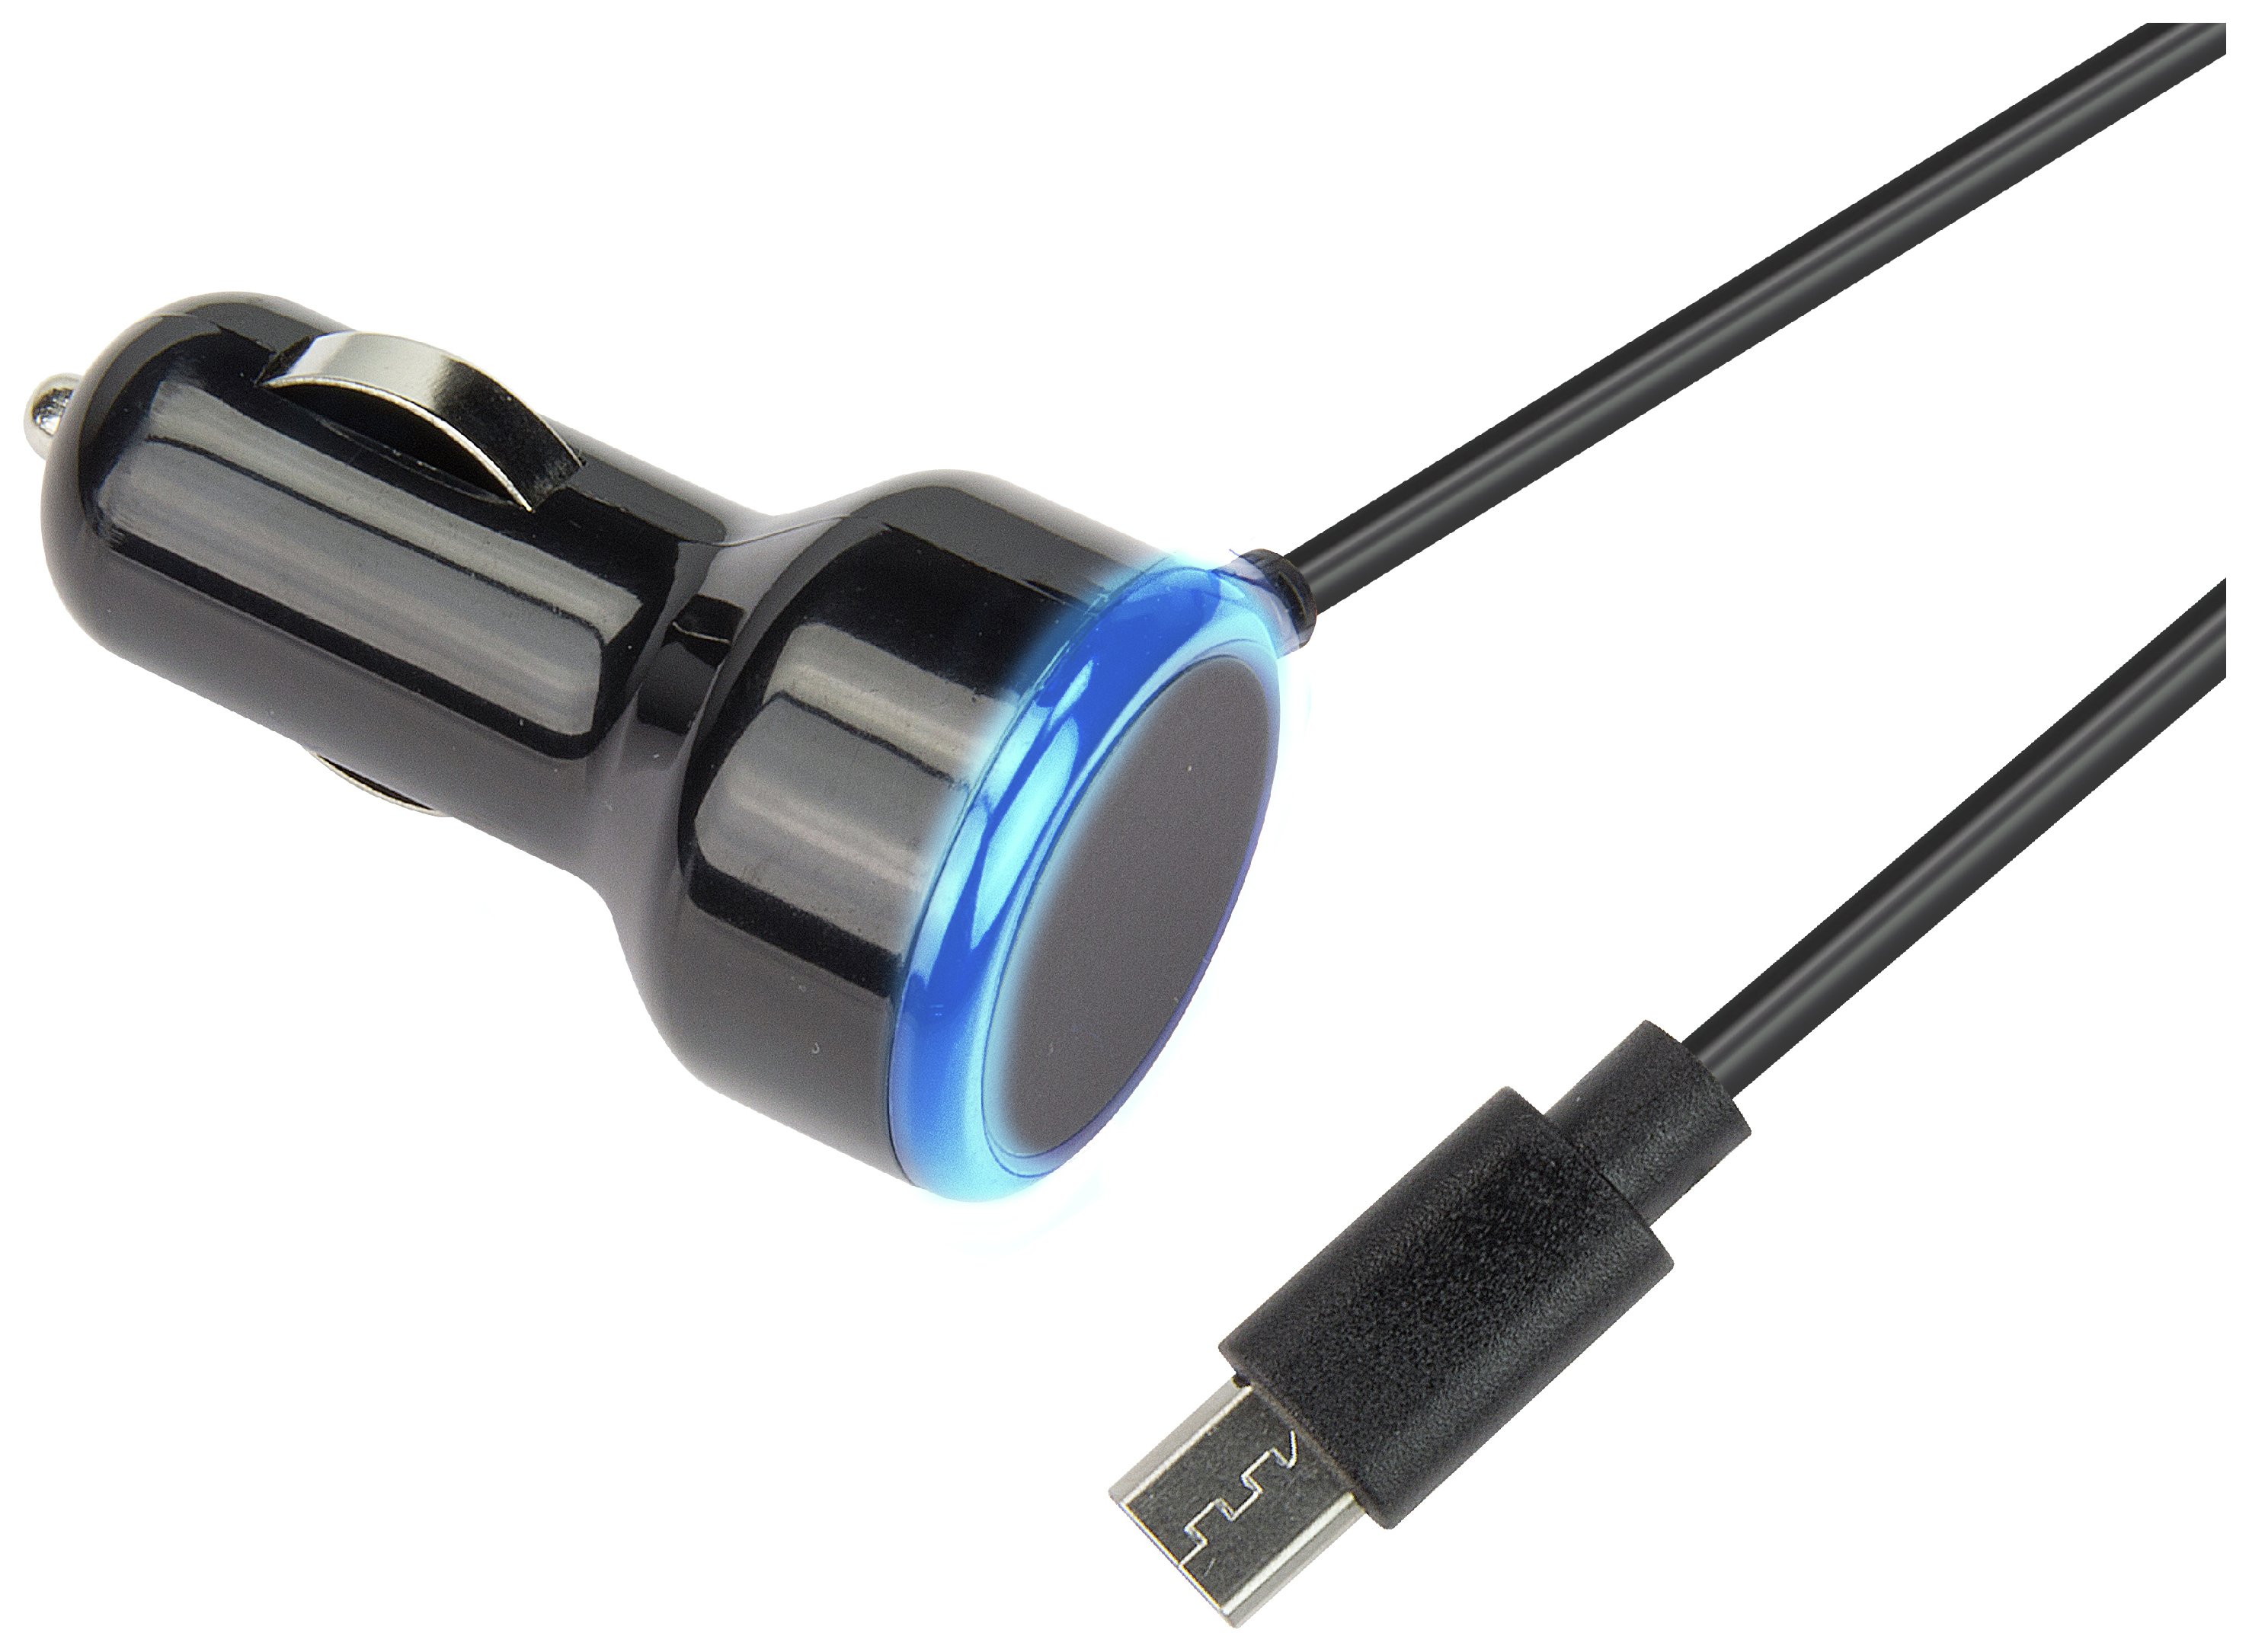 Bush Smartphone Micro USB In Car Charger